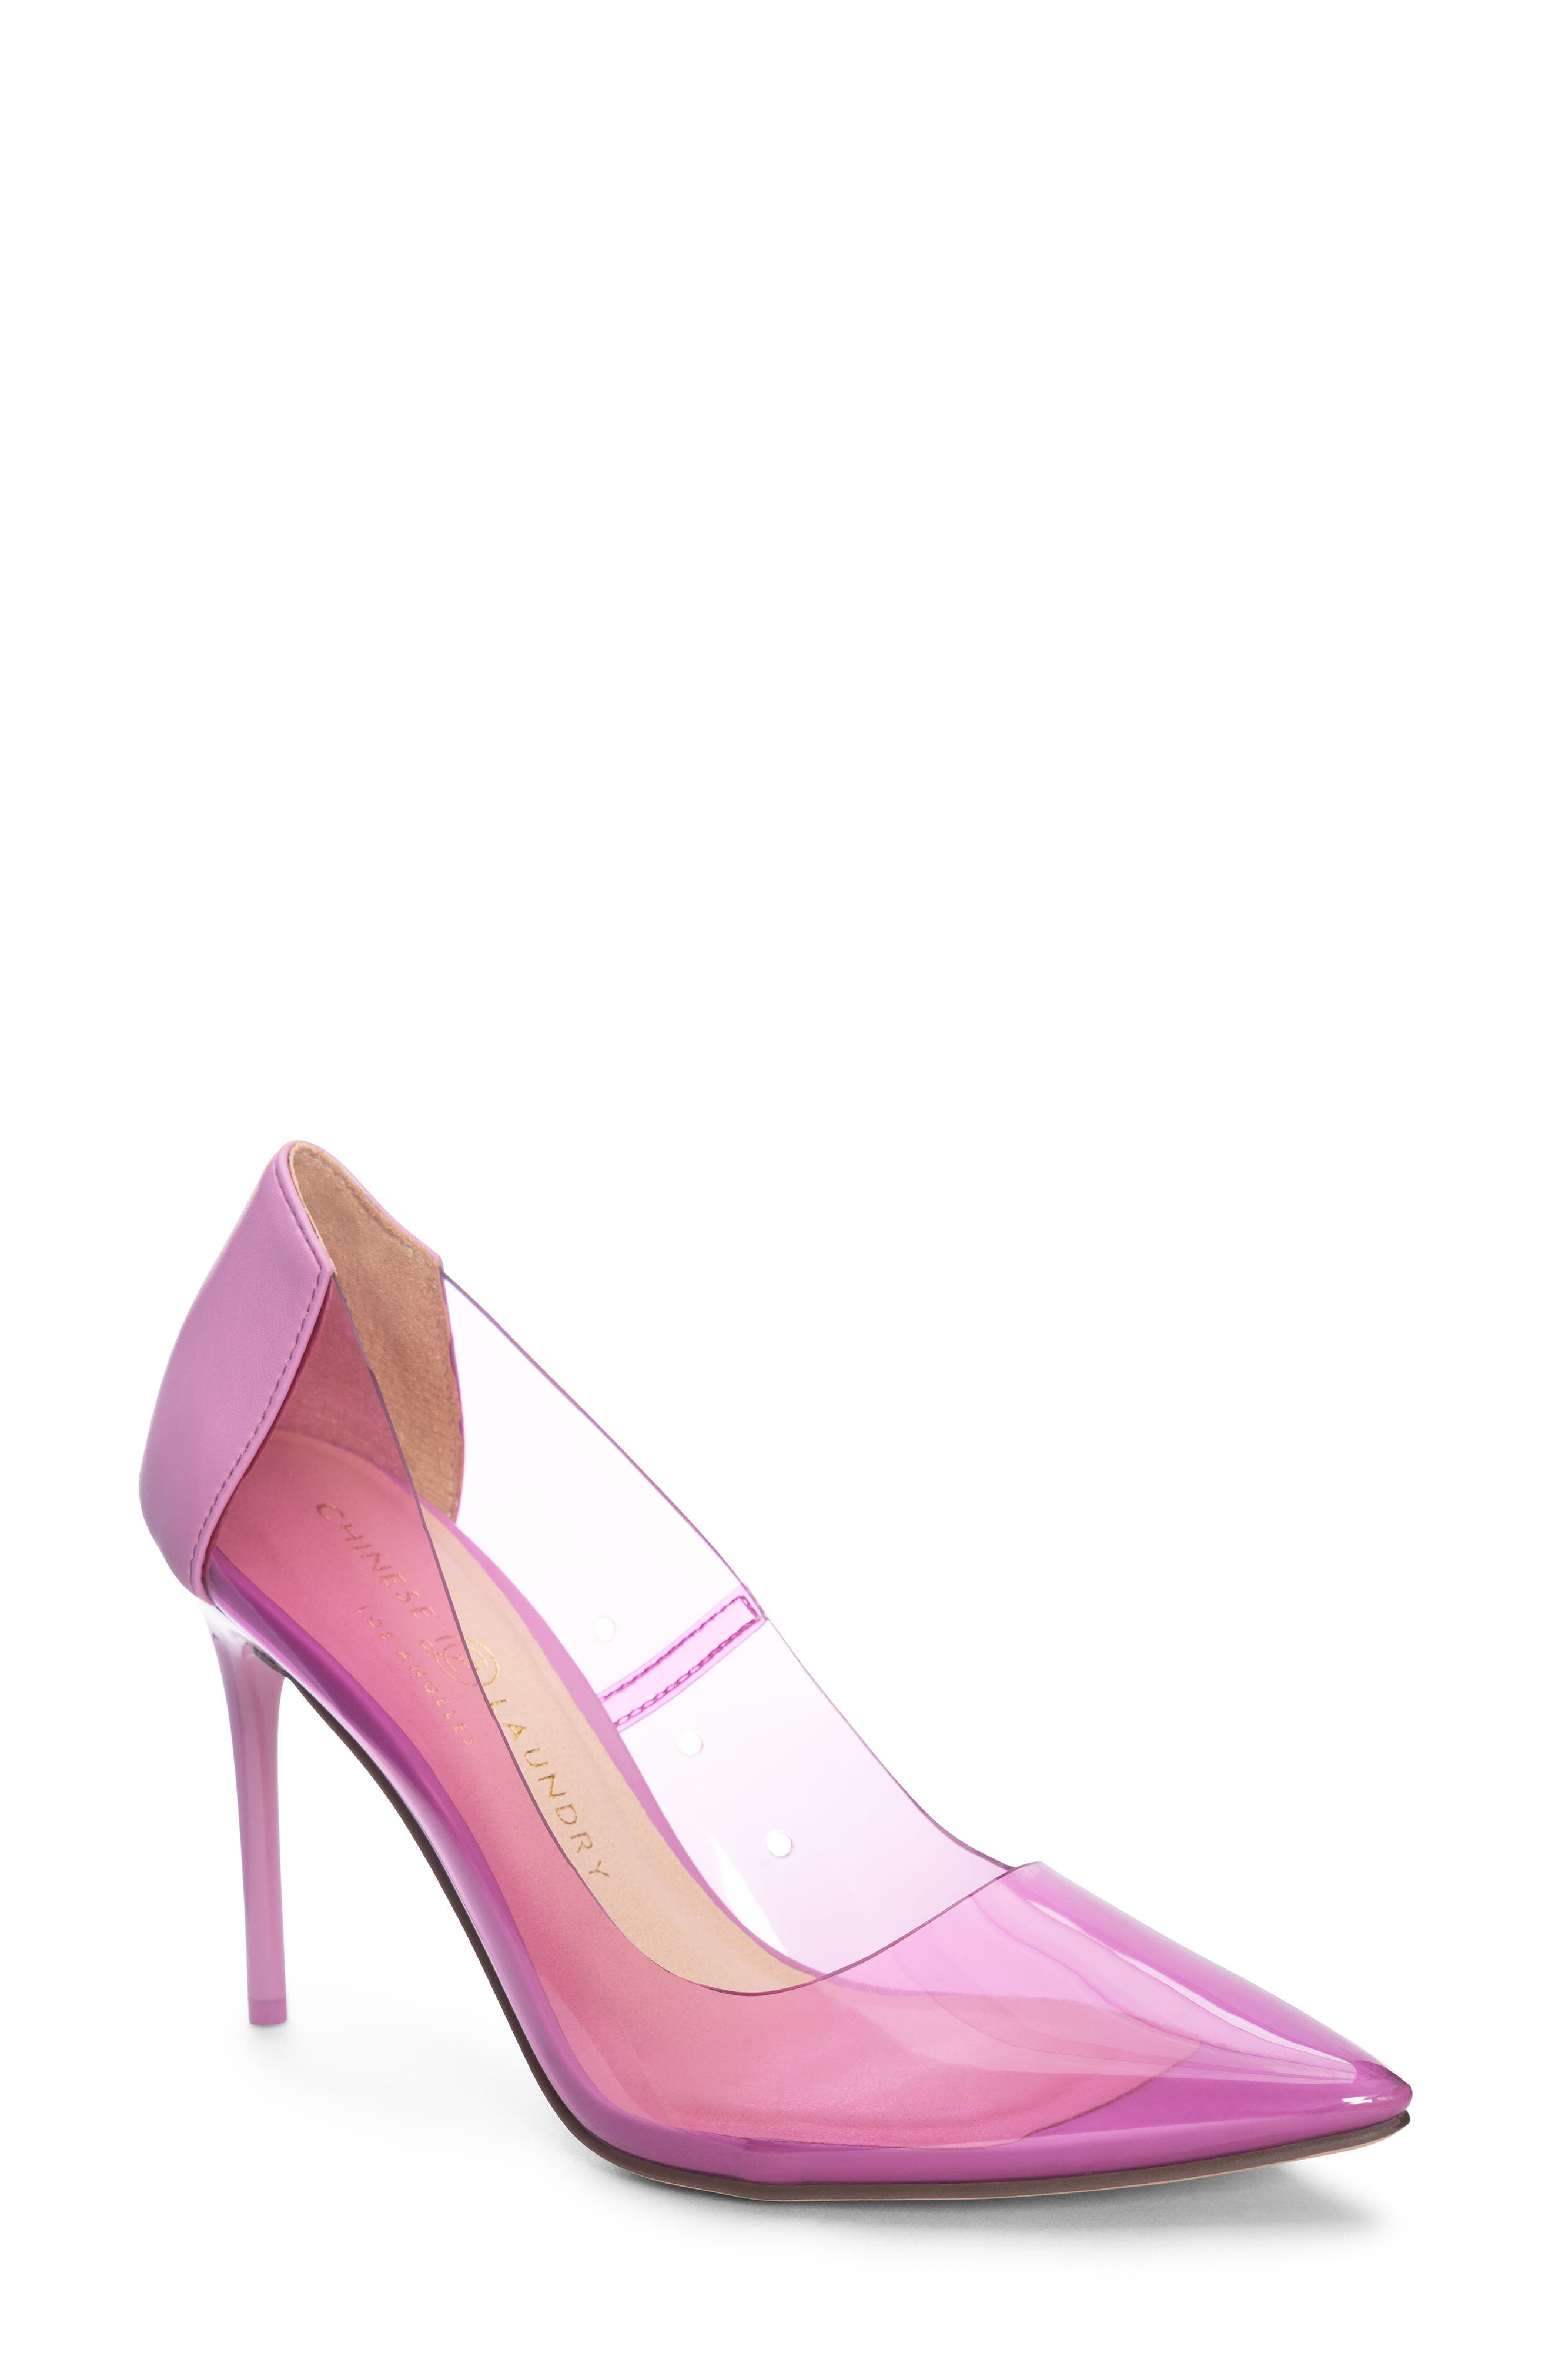 Chinese Laundry Darling Pointed Toe Pump in Purple